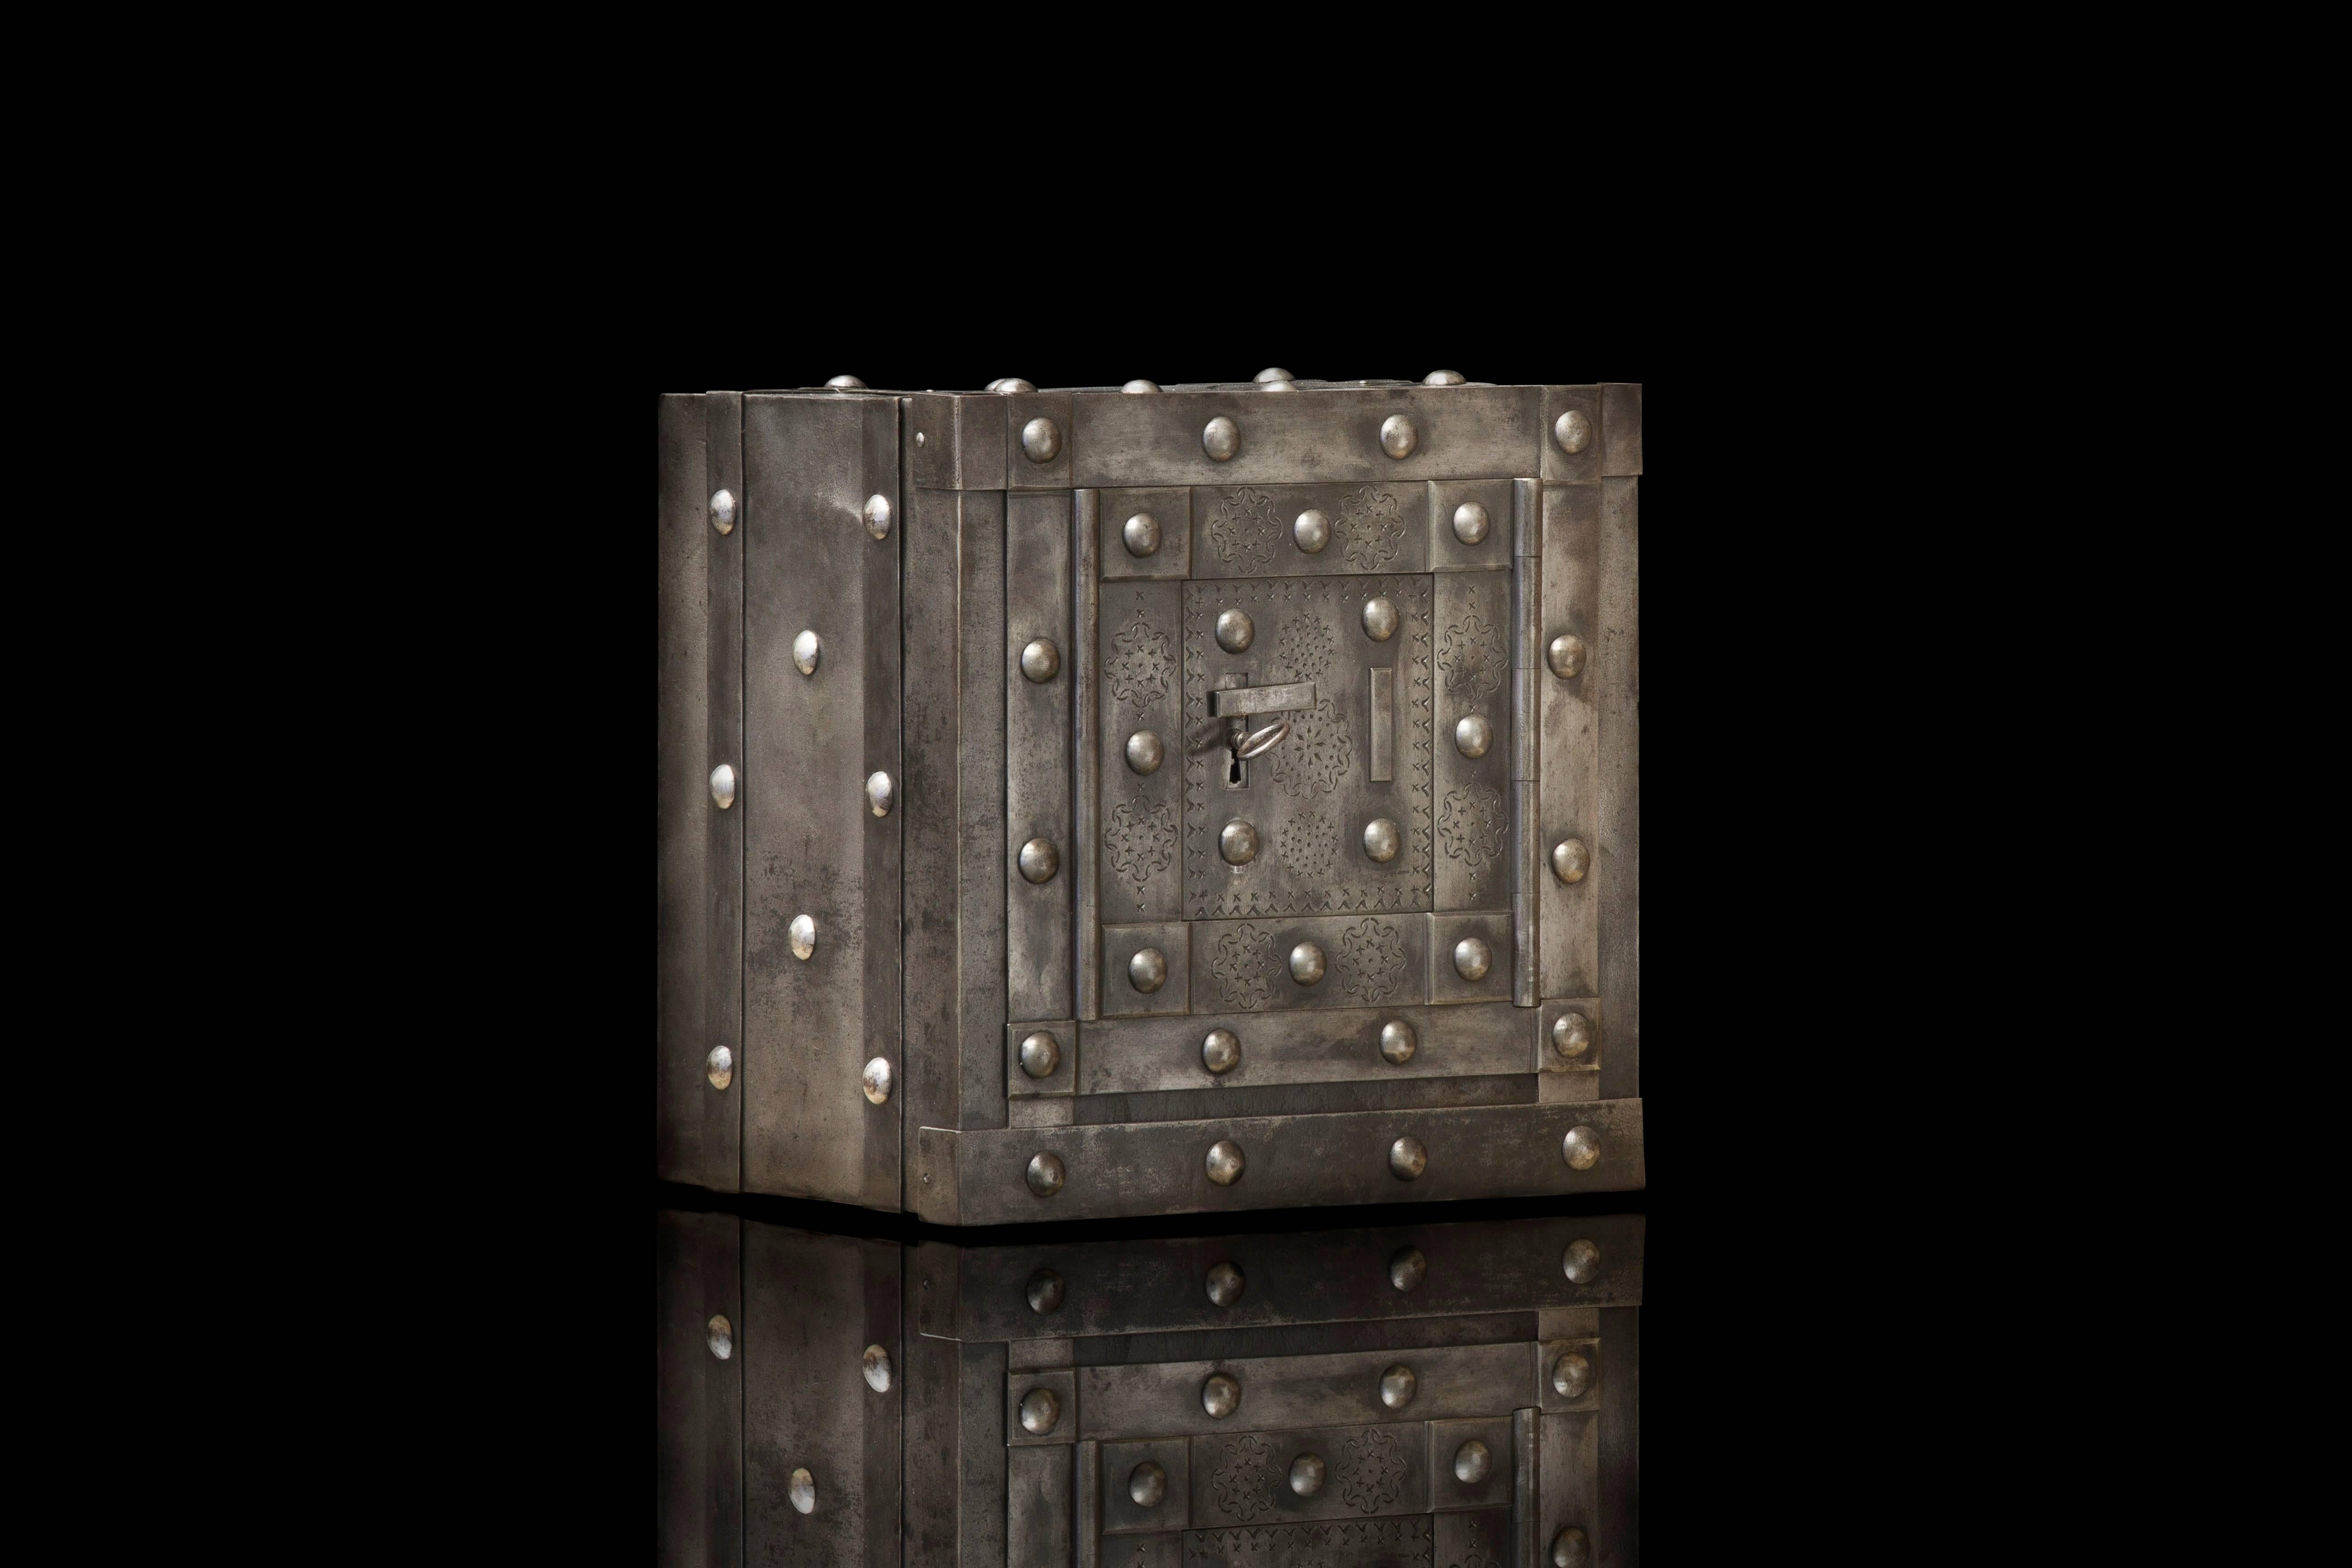 Northern Italian mini-hobnail safe, desk top size, circa 1810-1830. This almost 200 year old safe has an original and working key lock door, with a hidden release to expose the key hole and a secret sequence to follow with the key to activate the